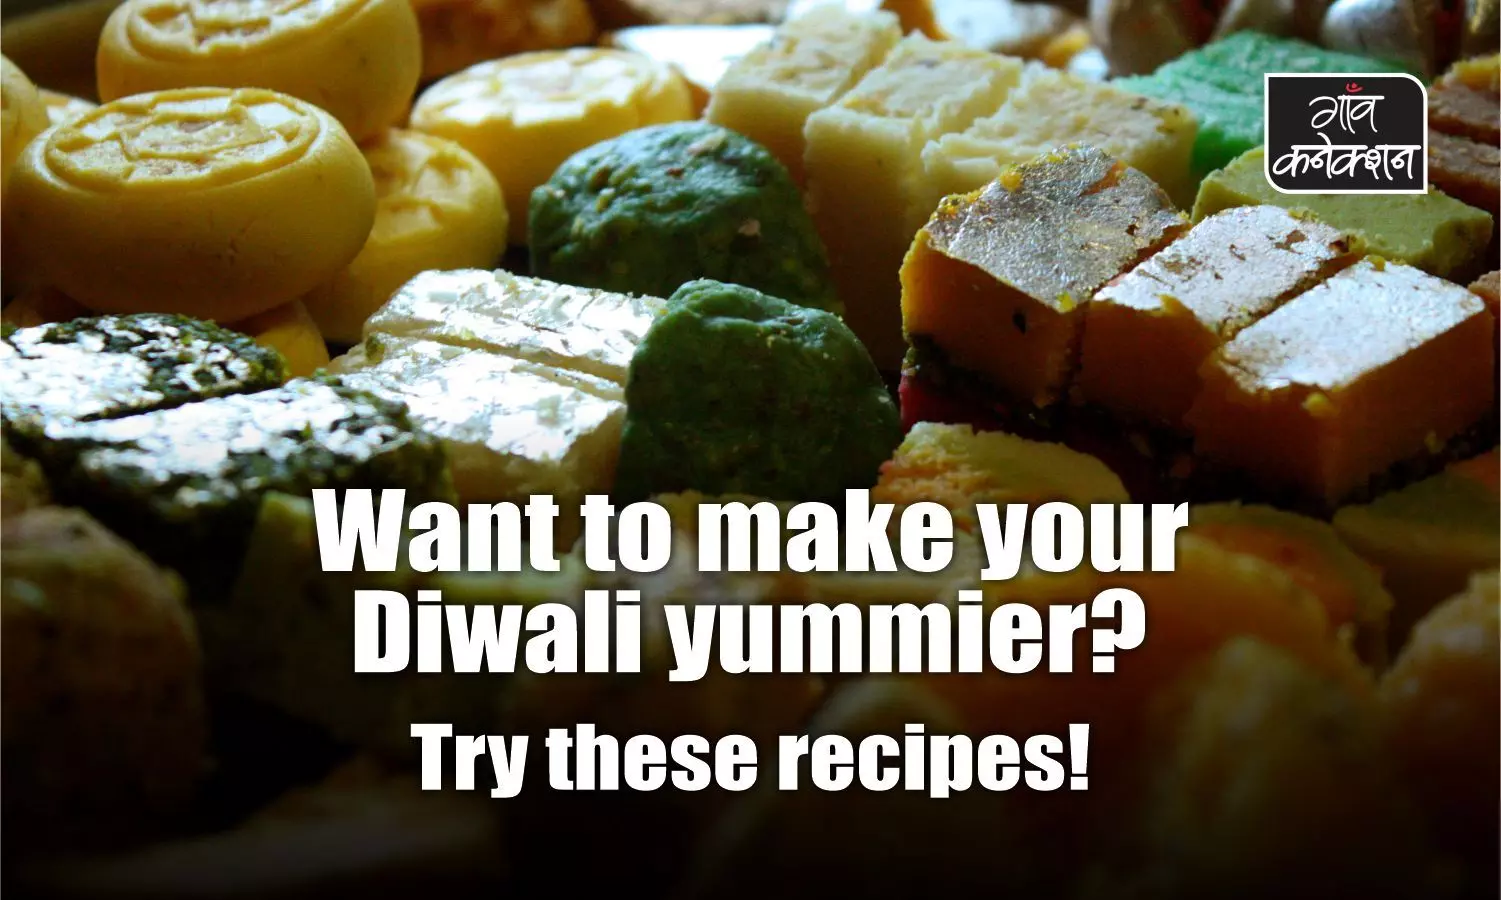 This Diwali, try some traditional recipes, invite people home!